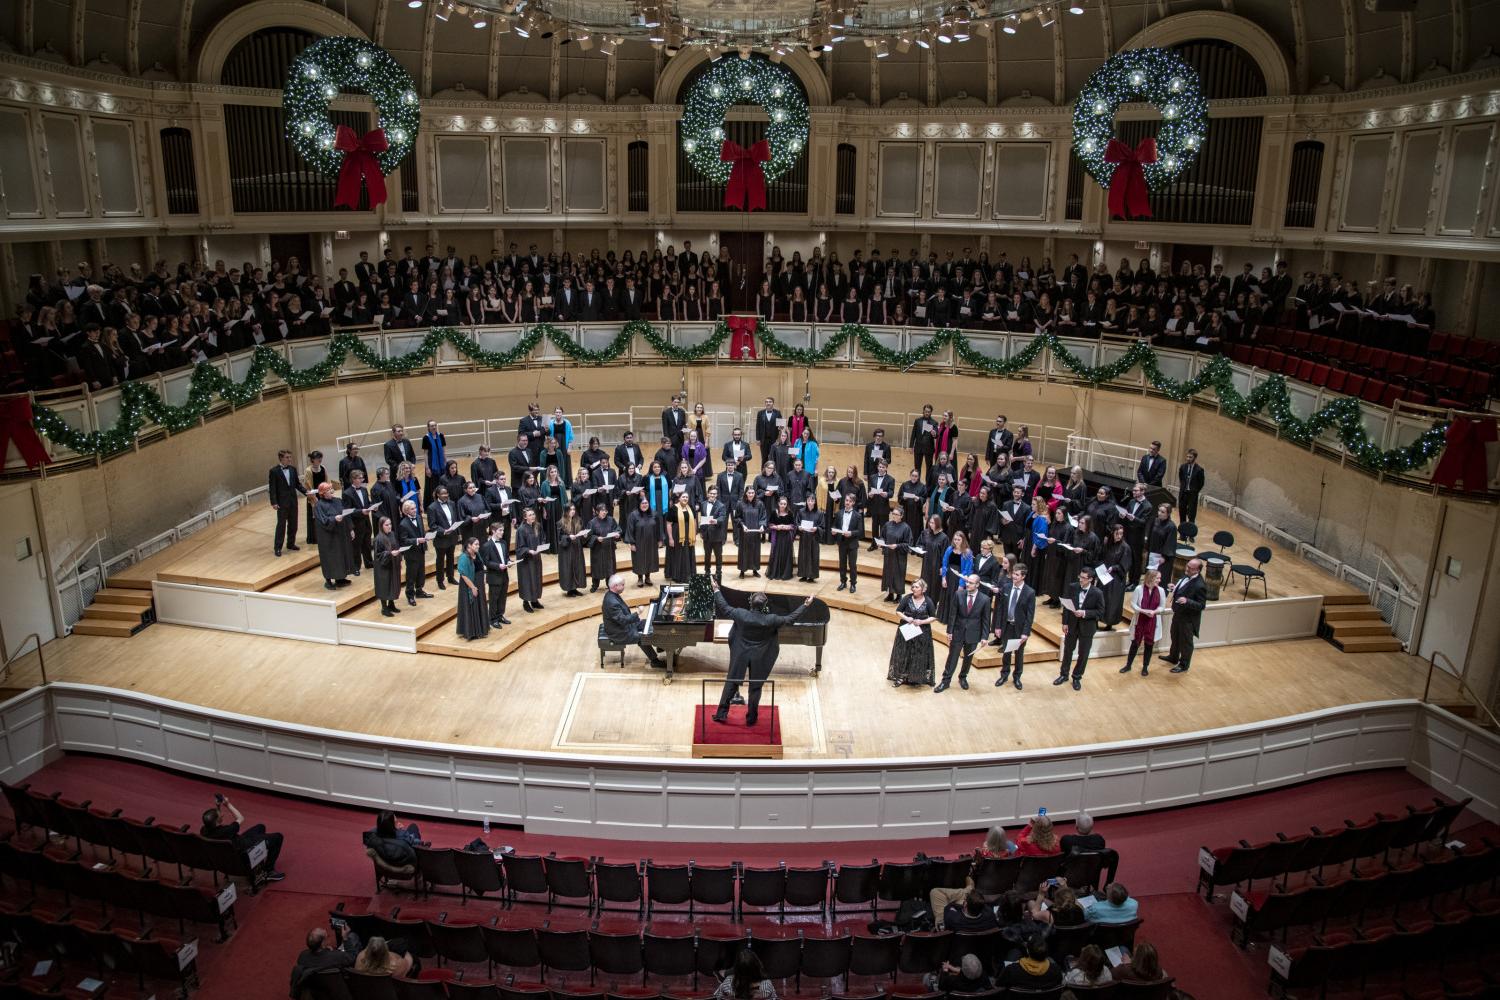 The <a href='http://fo3ke4.uncsj.com'>bv伟德ios下载</a> Choir performs in the Chicago Symphony Hall.